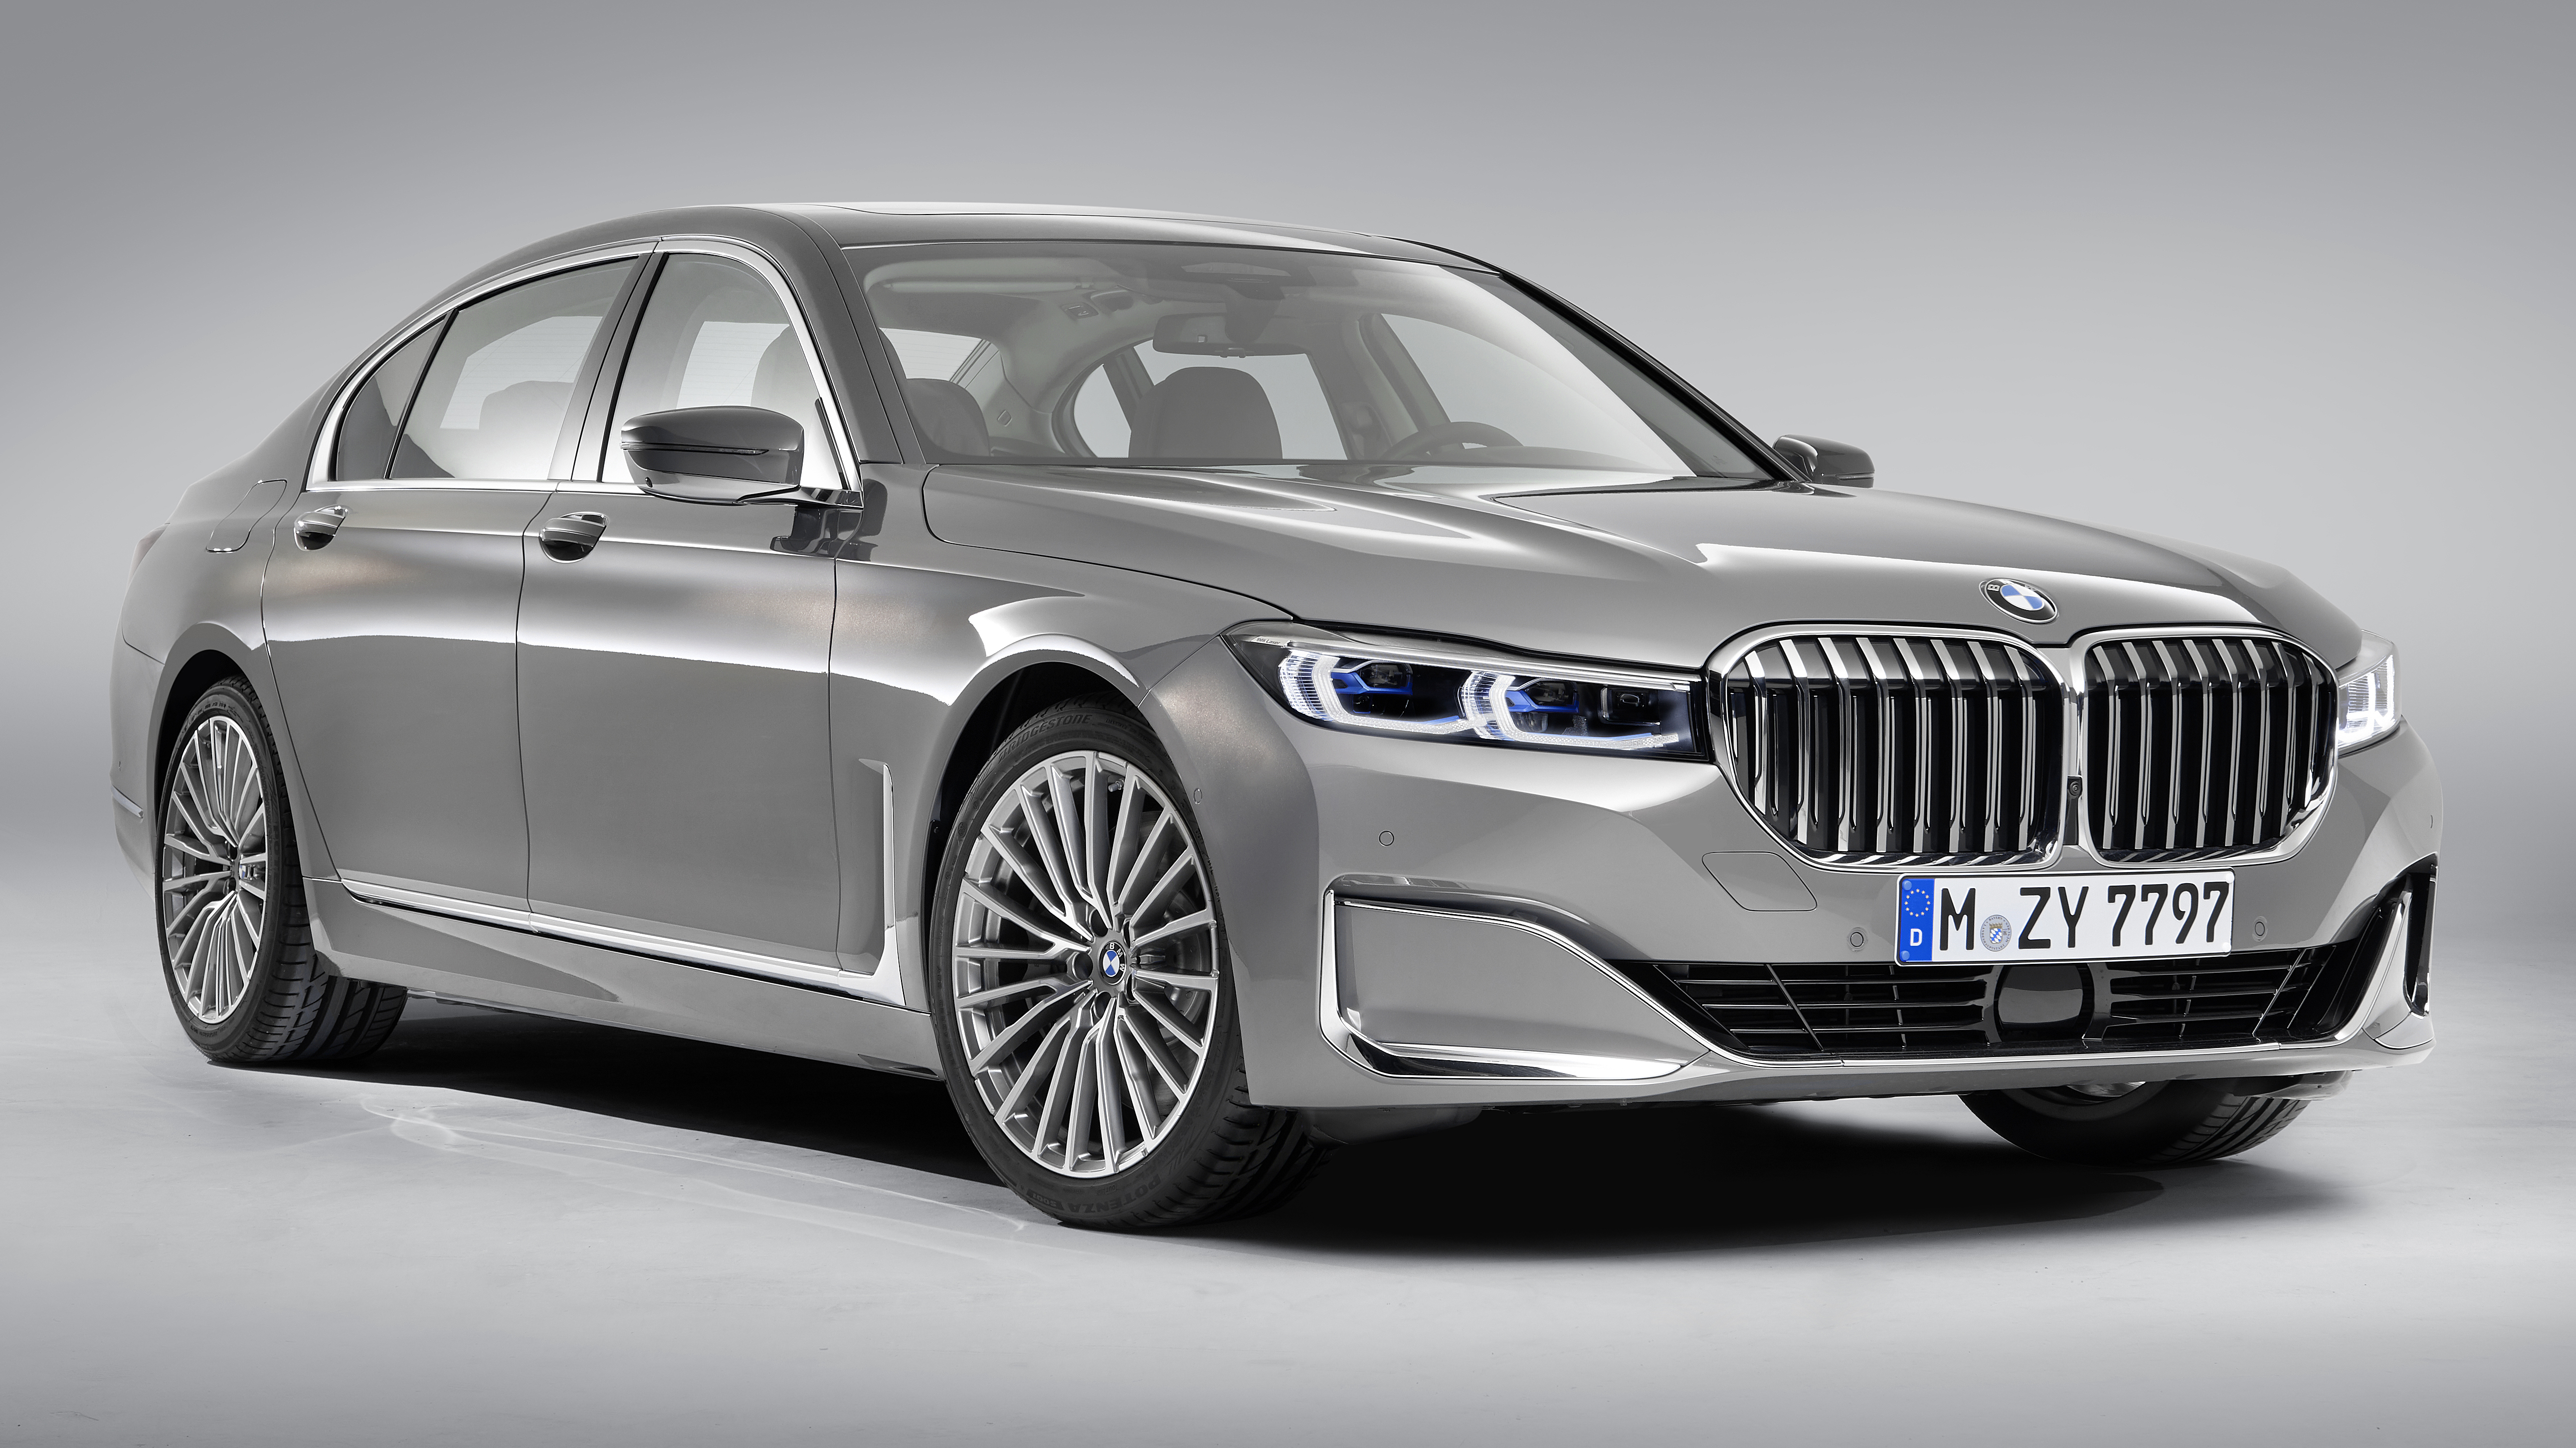 Why are BMW 7 Series so cheap?